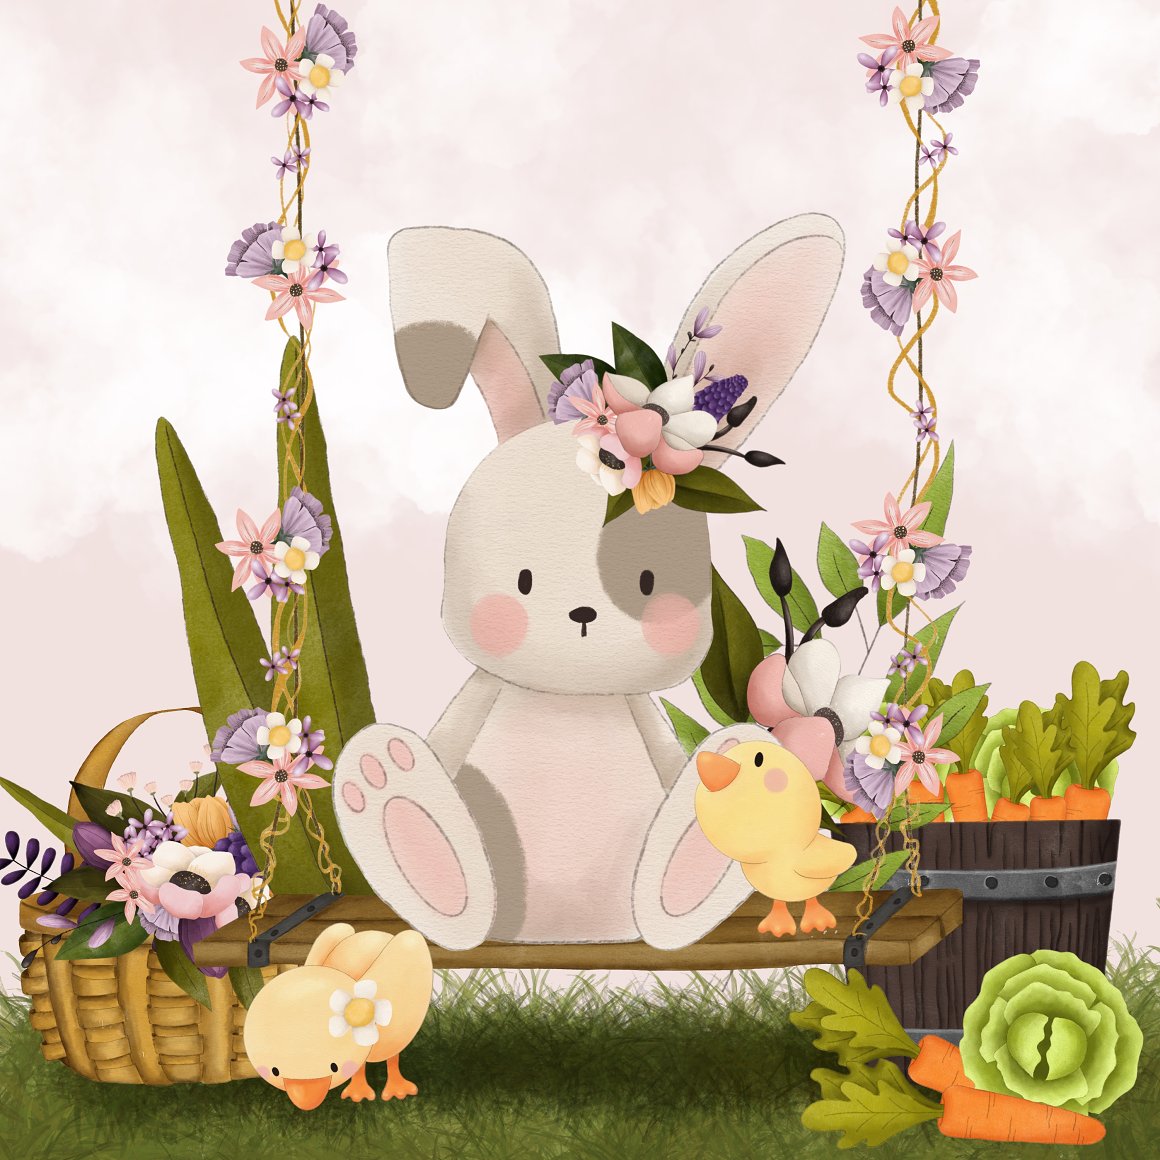 Illustration of Easter bunny and chicks on a flower swing.